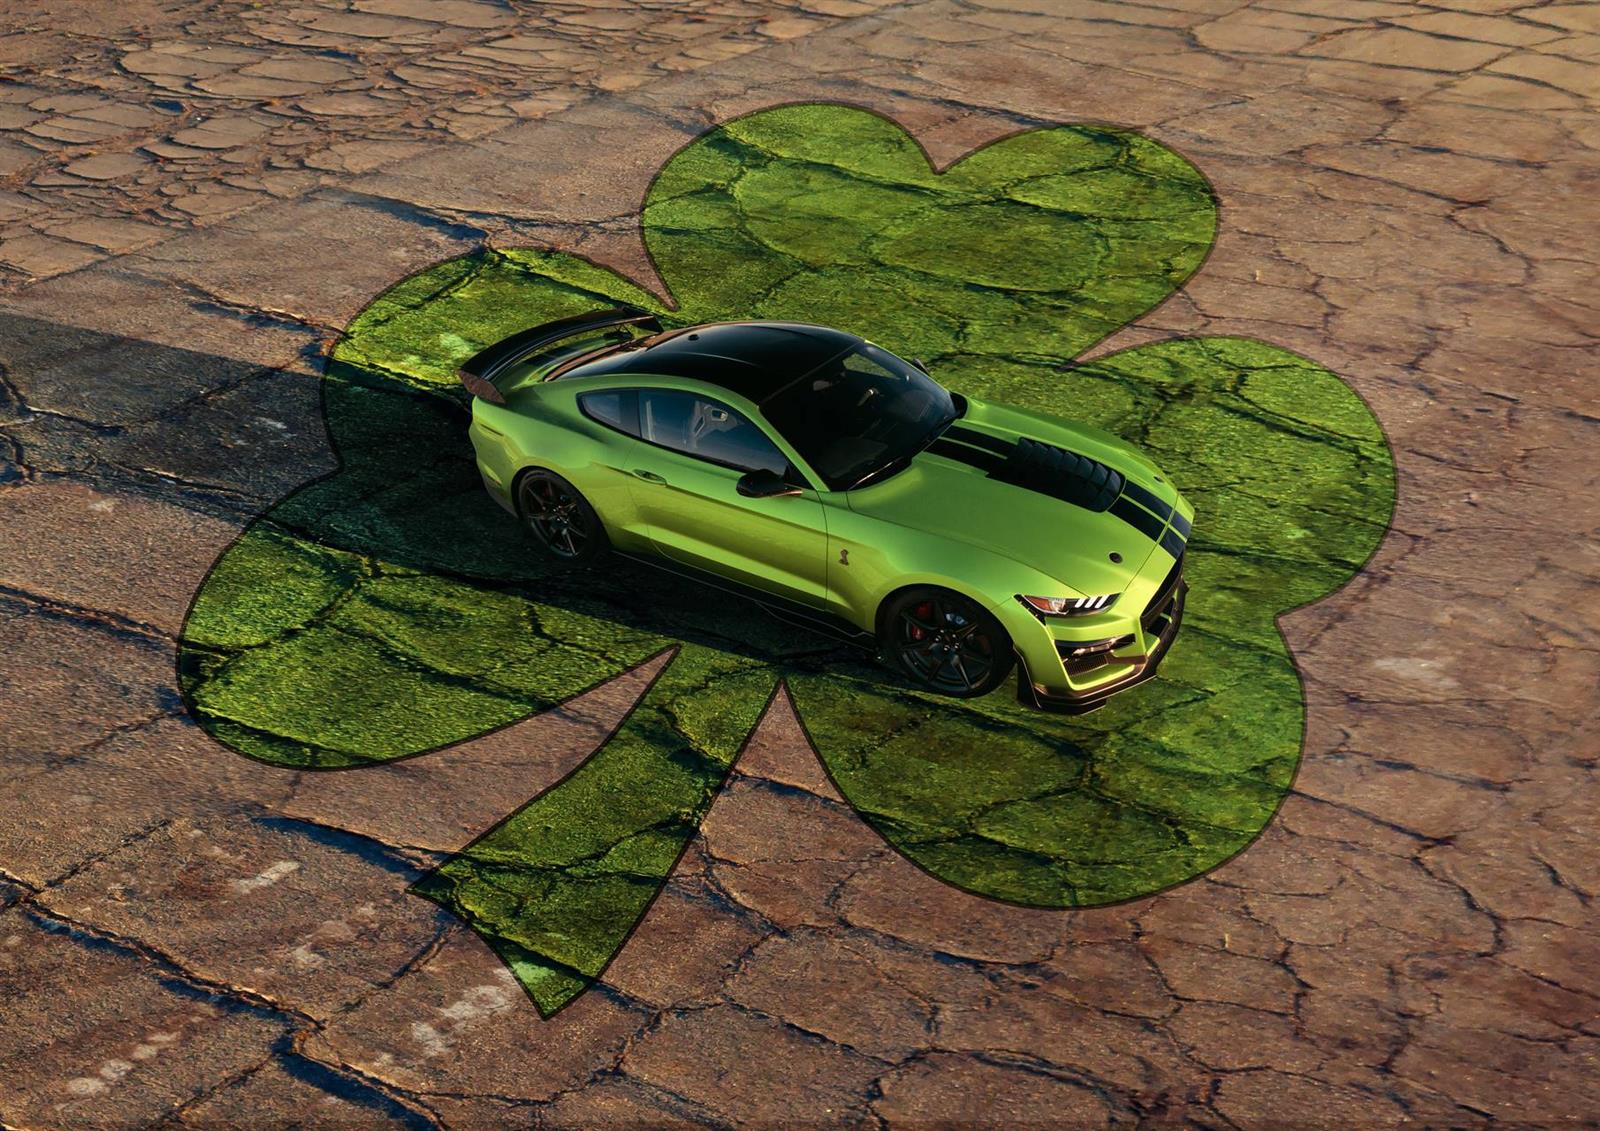 2020 Ford Mustang Shelby GT500 Grabber Lime